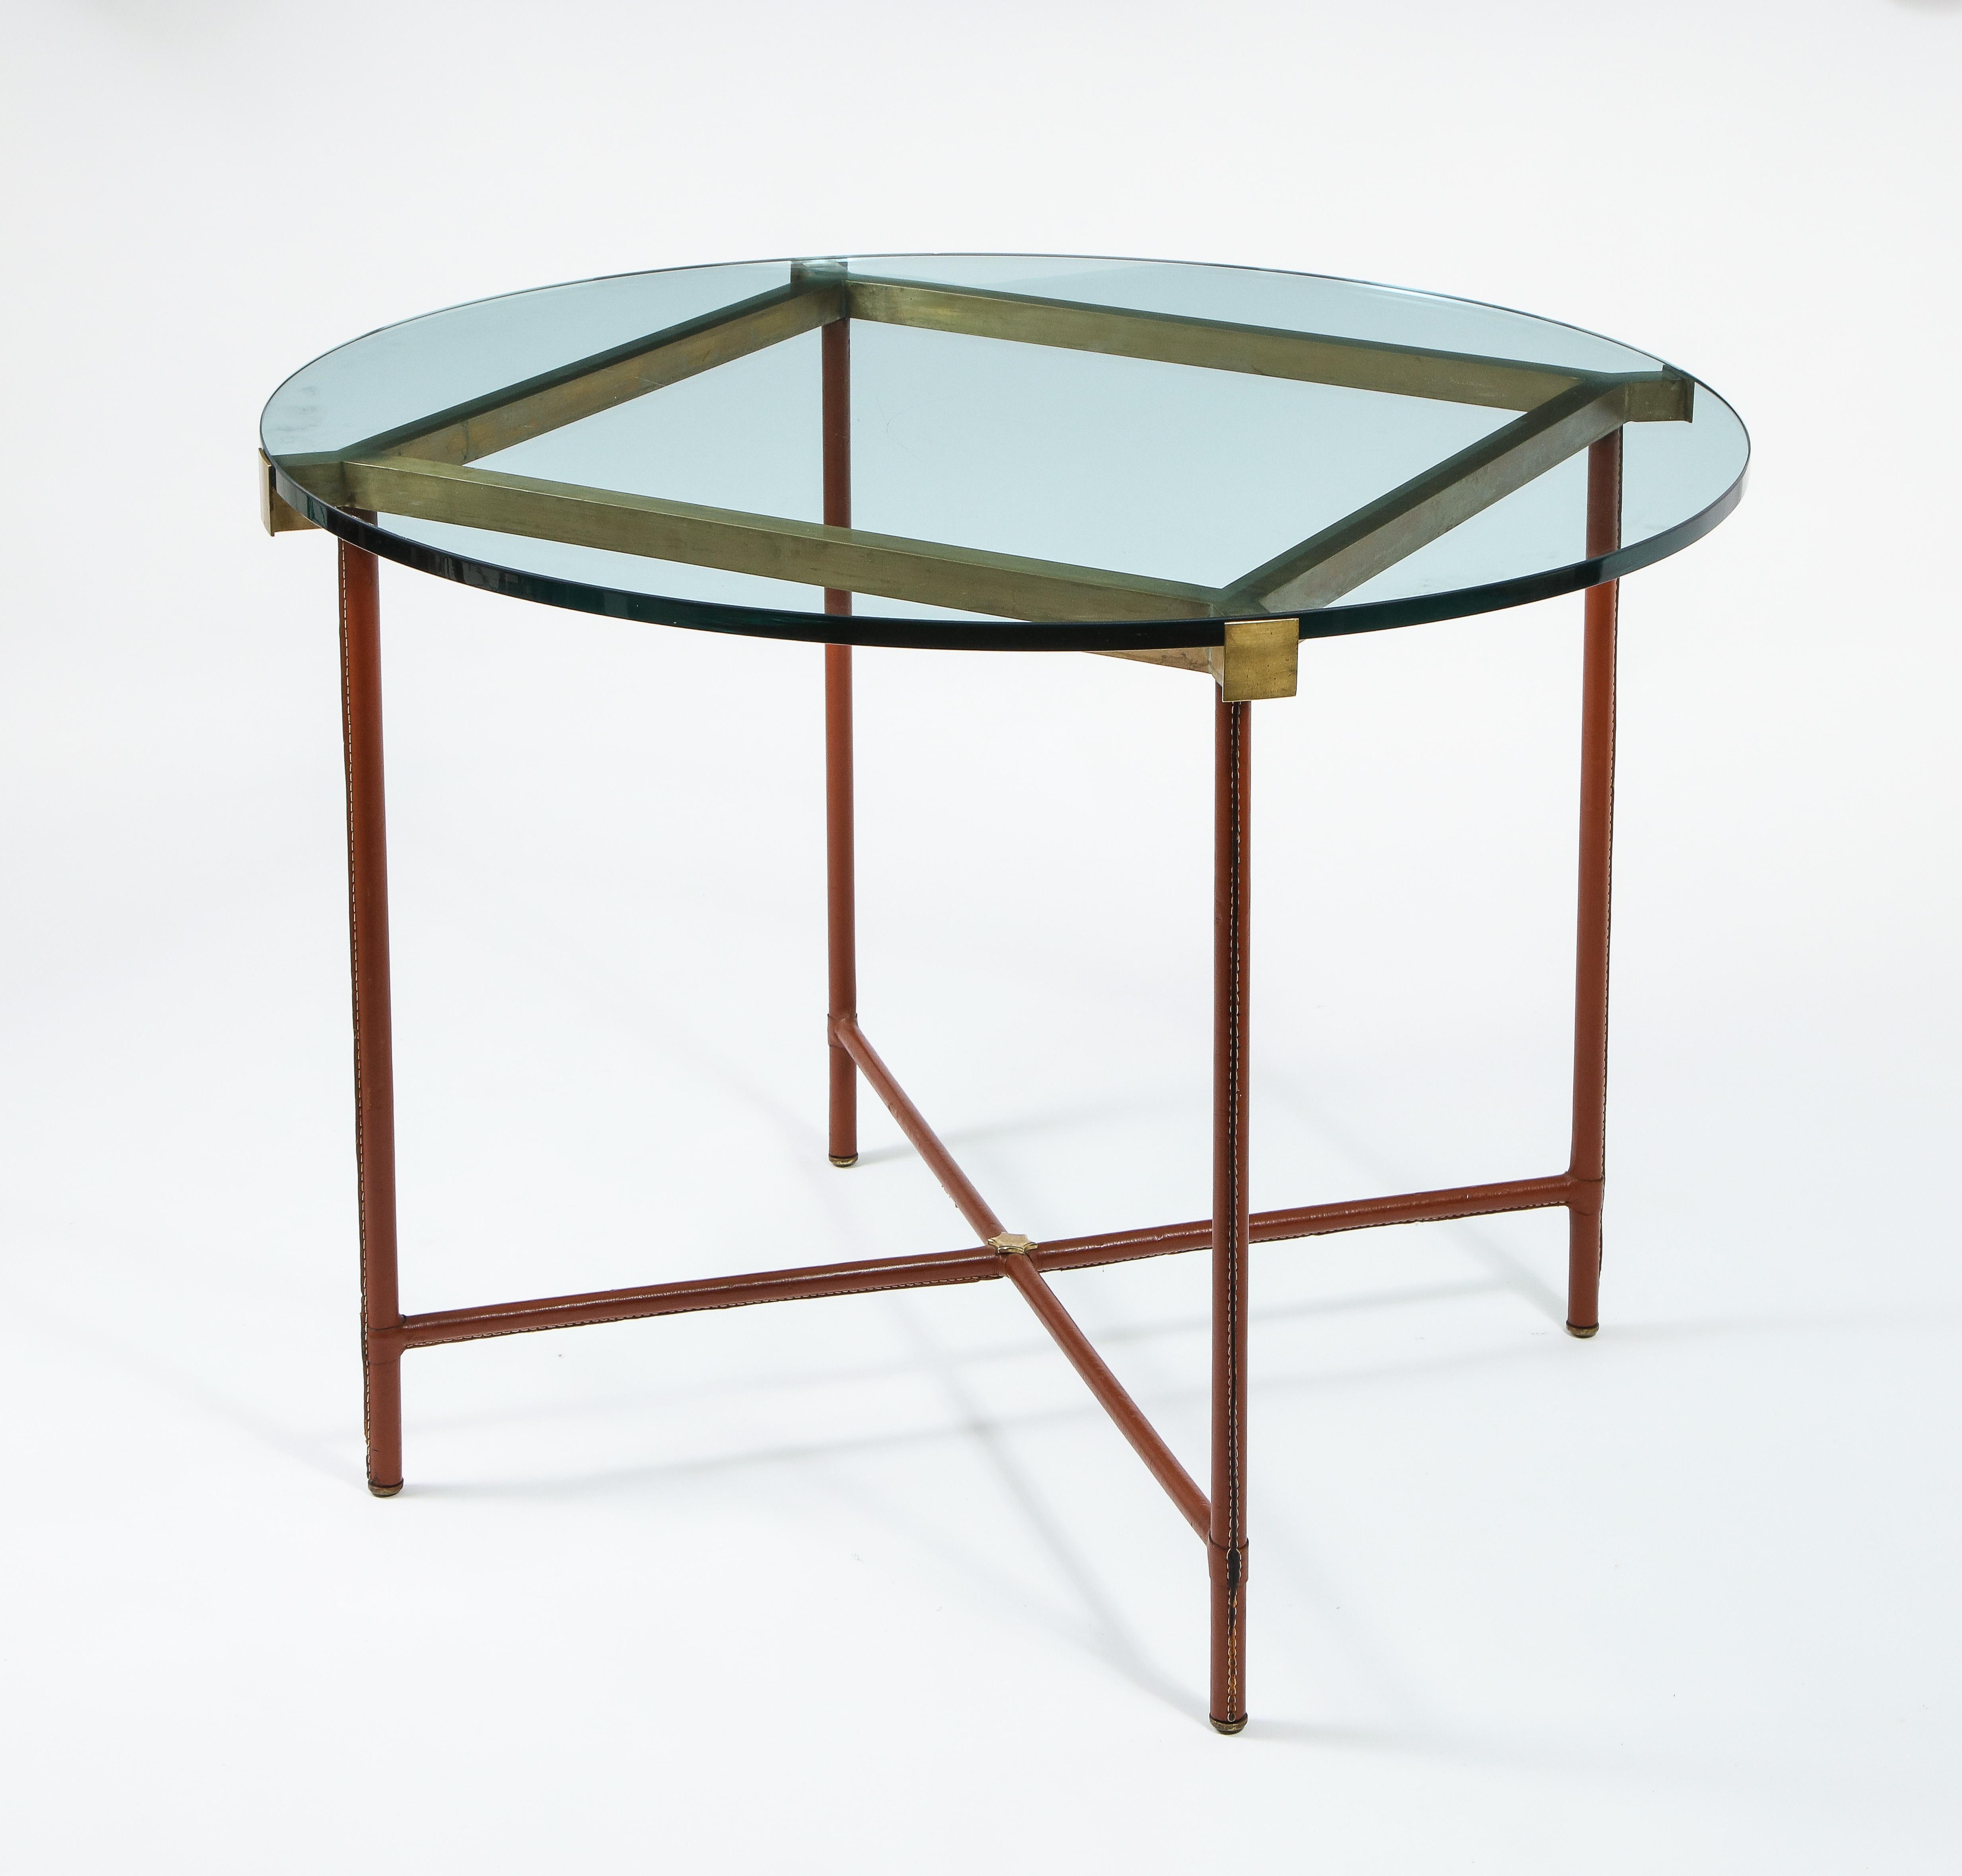 Jacques Adnet Center Table in Stitched Leather, Bronze and Gllass, France, 1950s For Sale 3